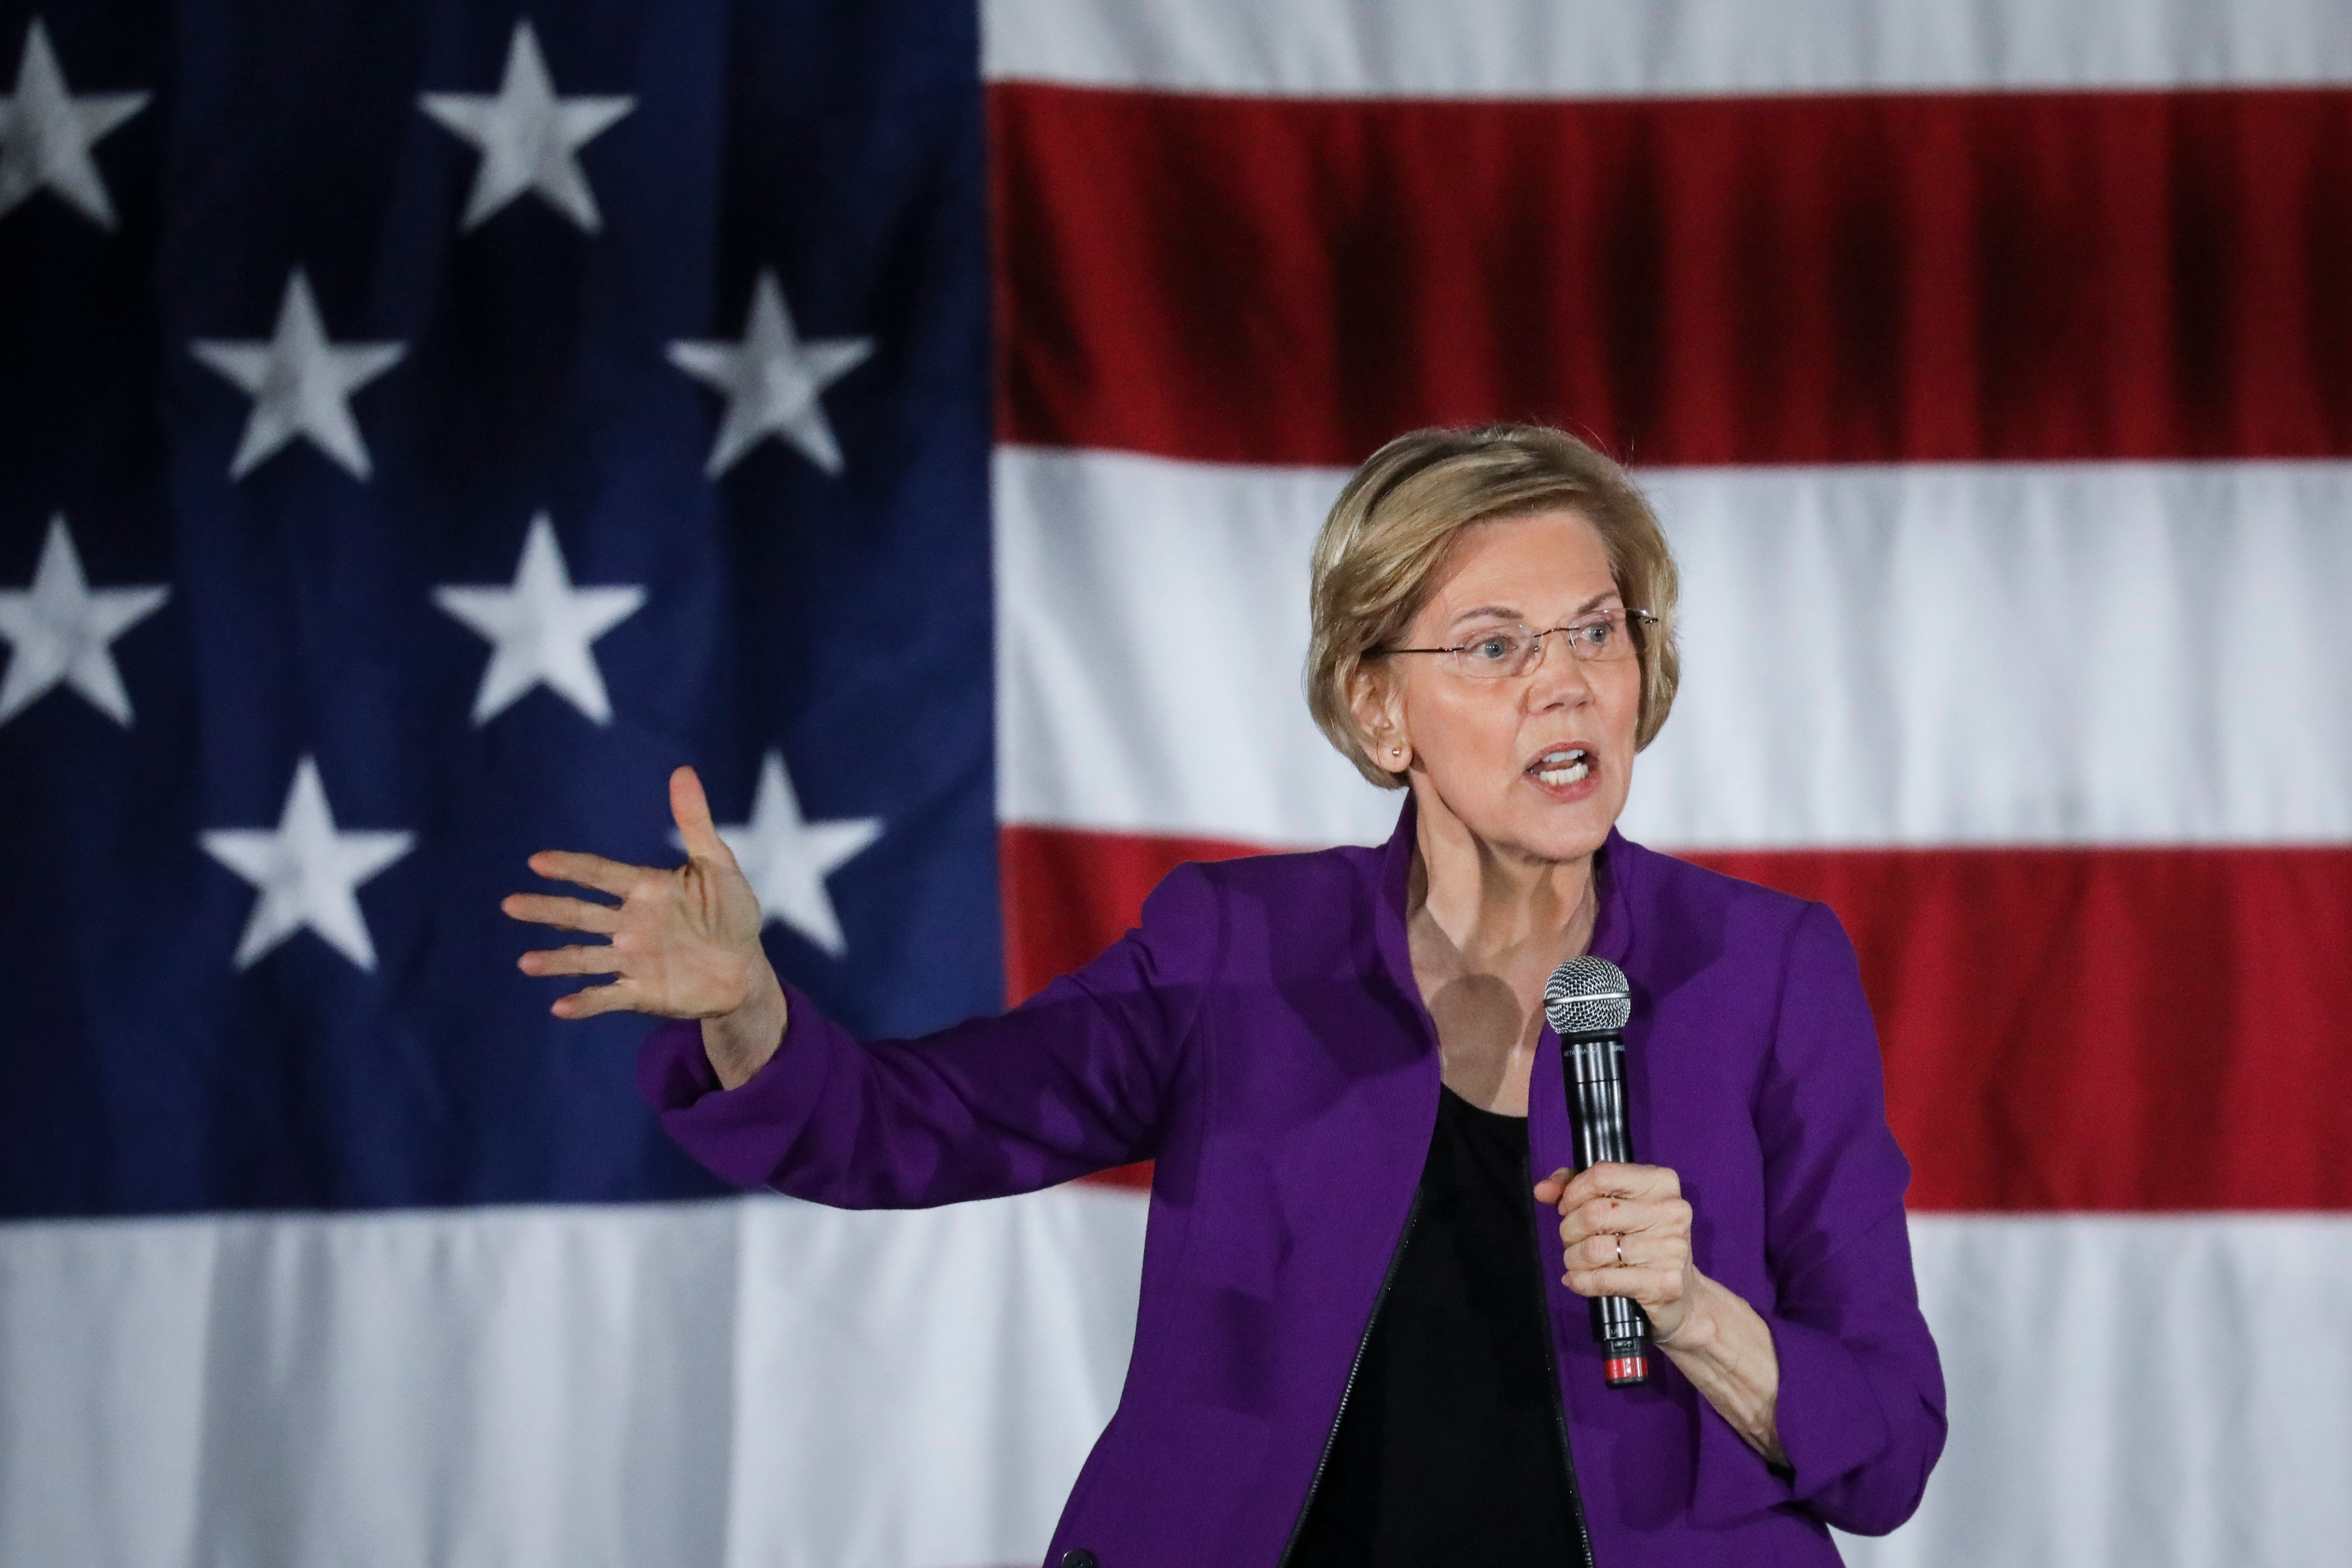 Sen. Elizabeth Warren (D-MA), one of several Democrats running for the party's nomination in the 2020 presidential race, speaks during a campaign event, March 8, 2019 in Queens, New York. (Drew Angerer—Getty Images)